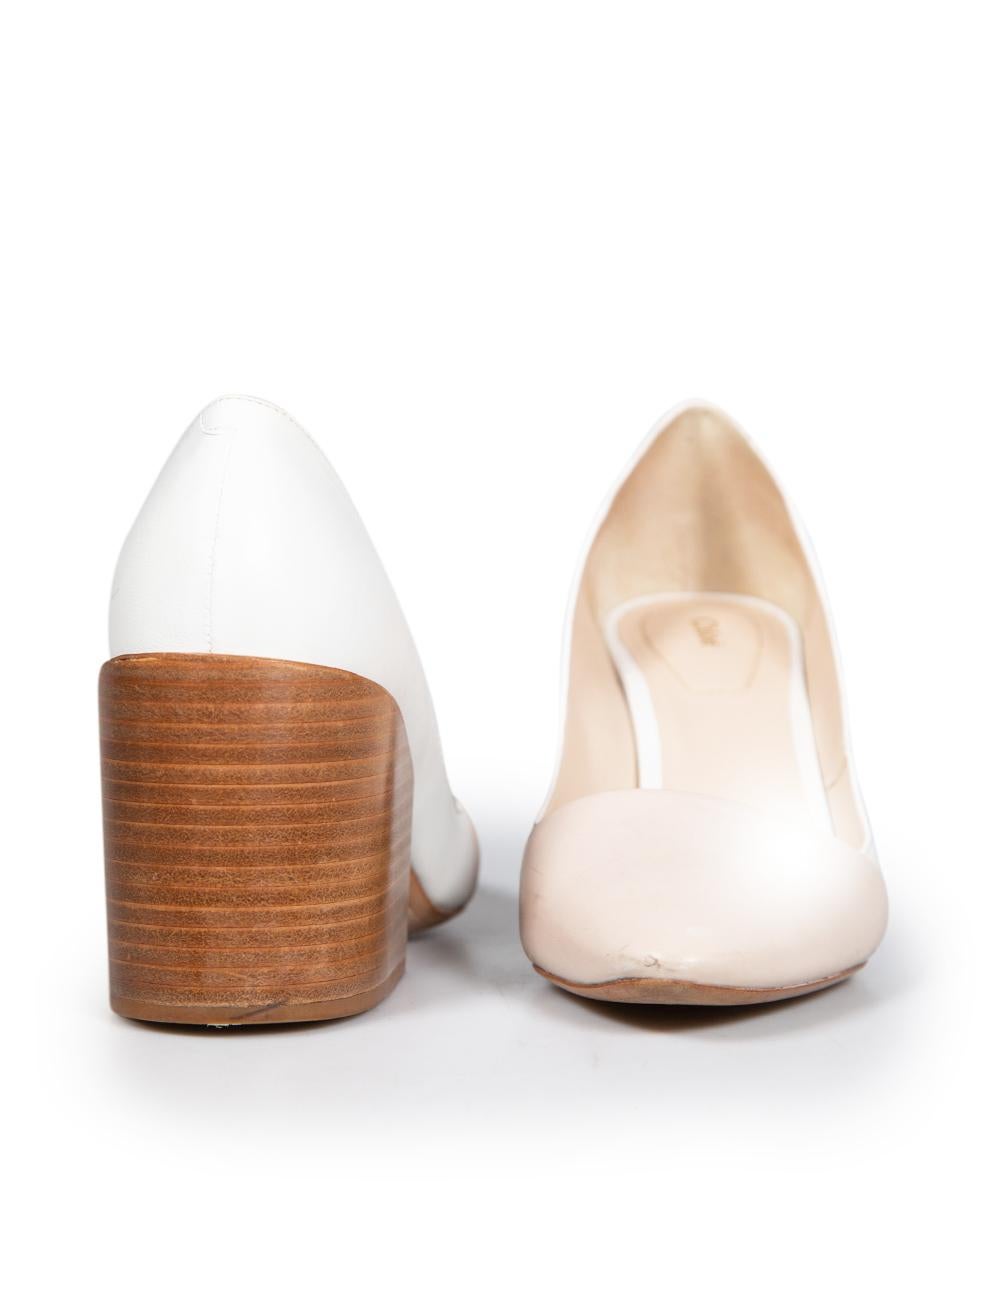 Chloé Beige & White Leather Block Heel Pumps Size IT 35.5 In Good Condition For Sale In London, GB